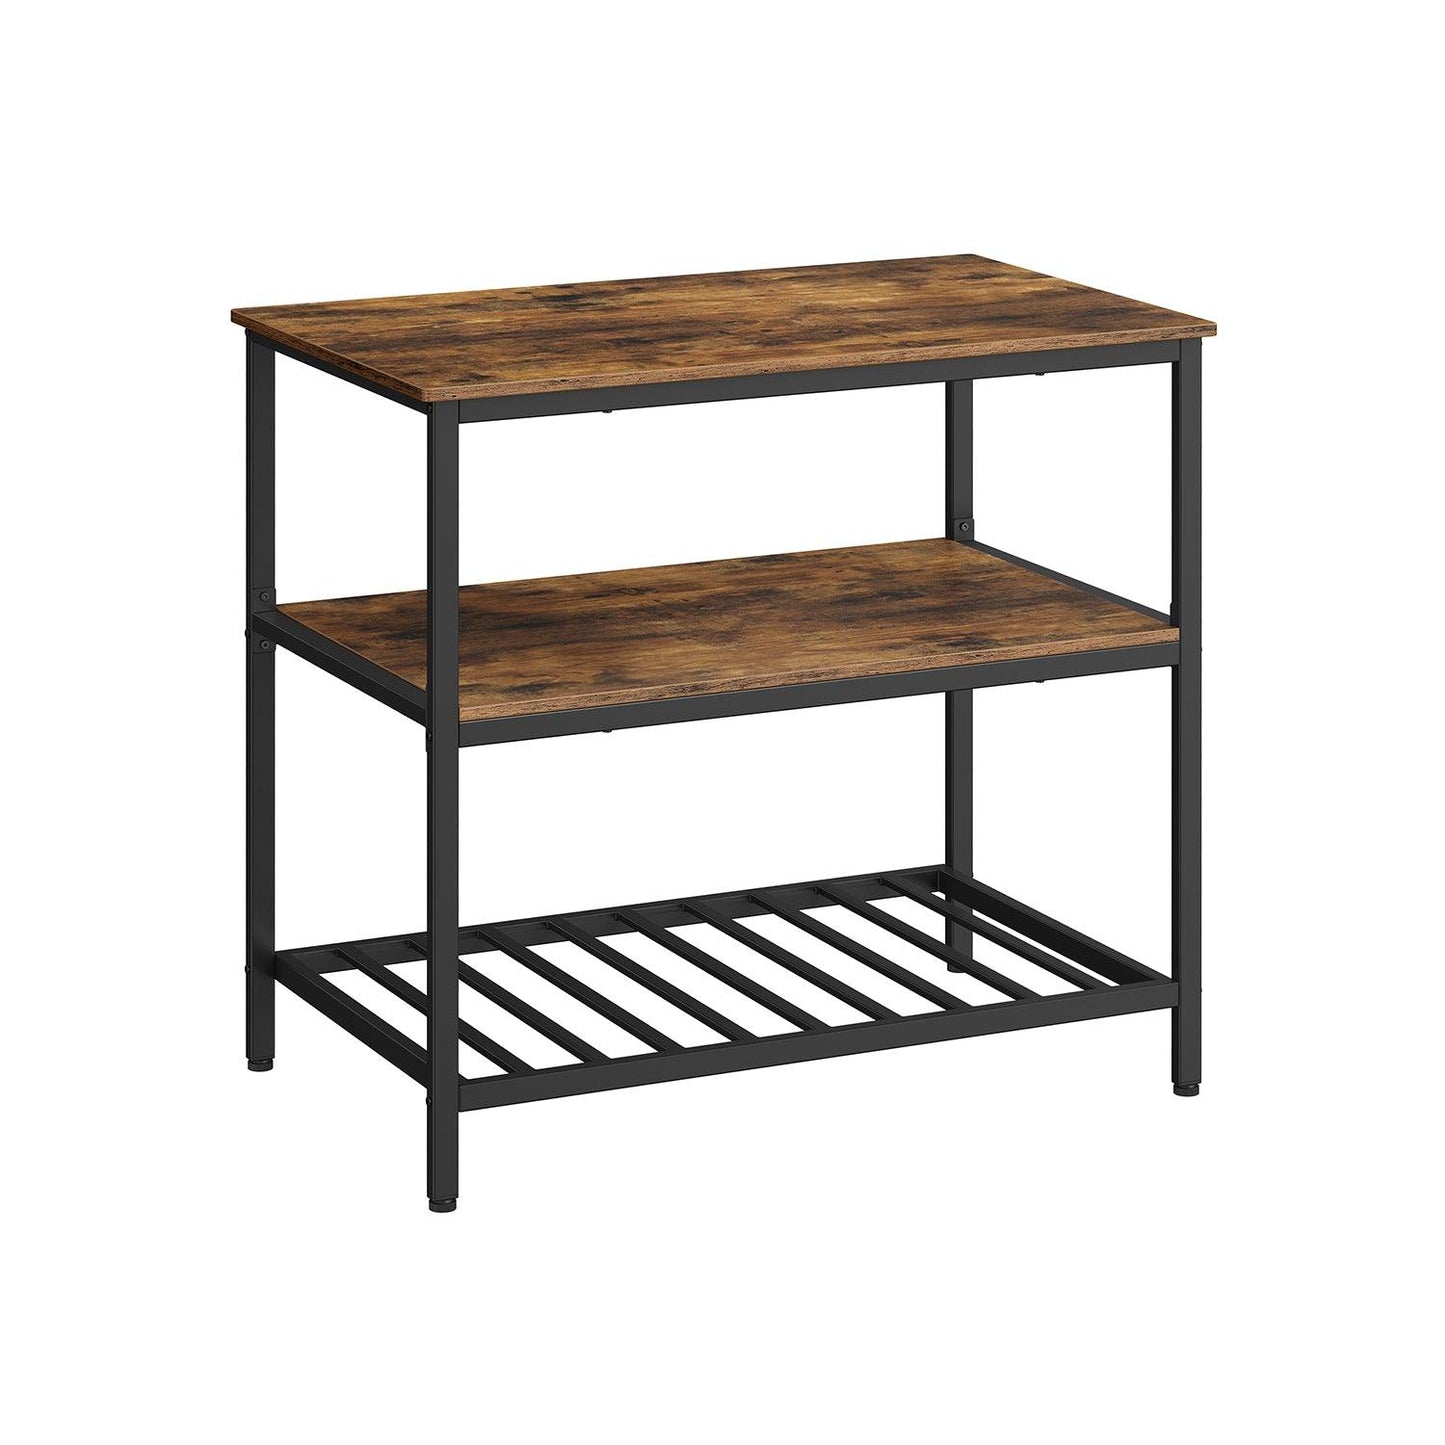 39.4 Inches Kitchen Shelf with Large Worktop Brown